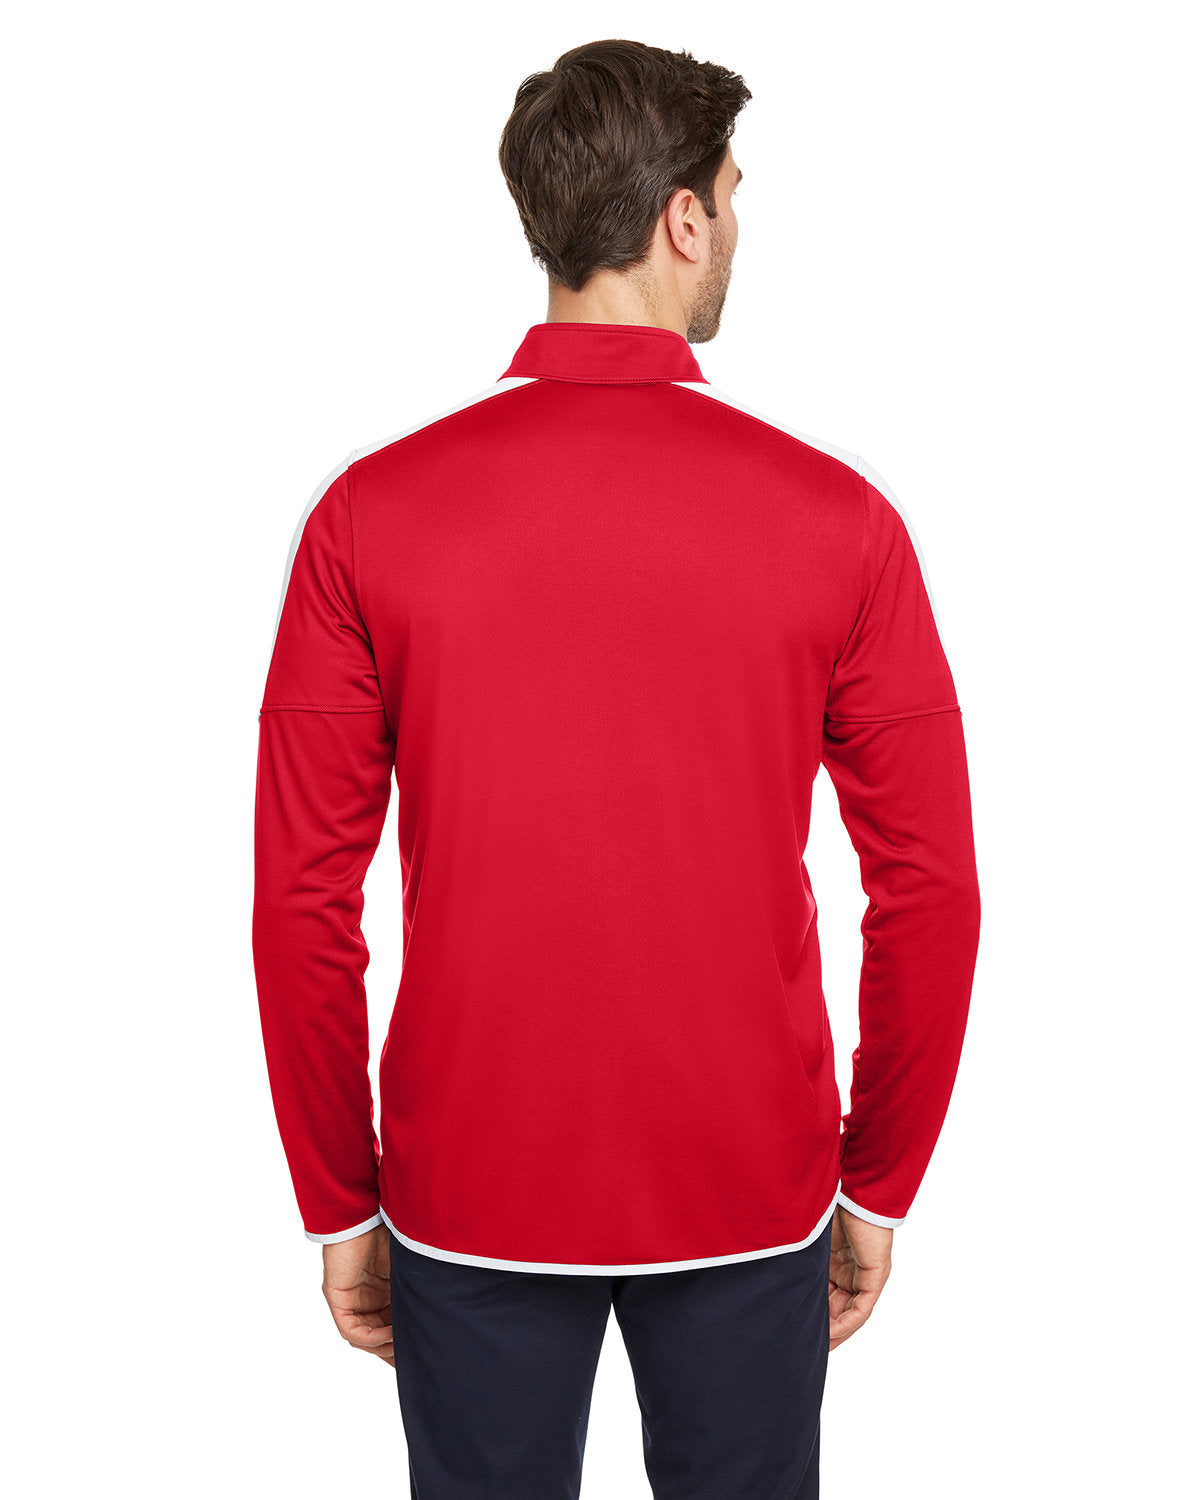 Under Armour Men's Rival Knit Jacket, Red